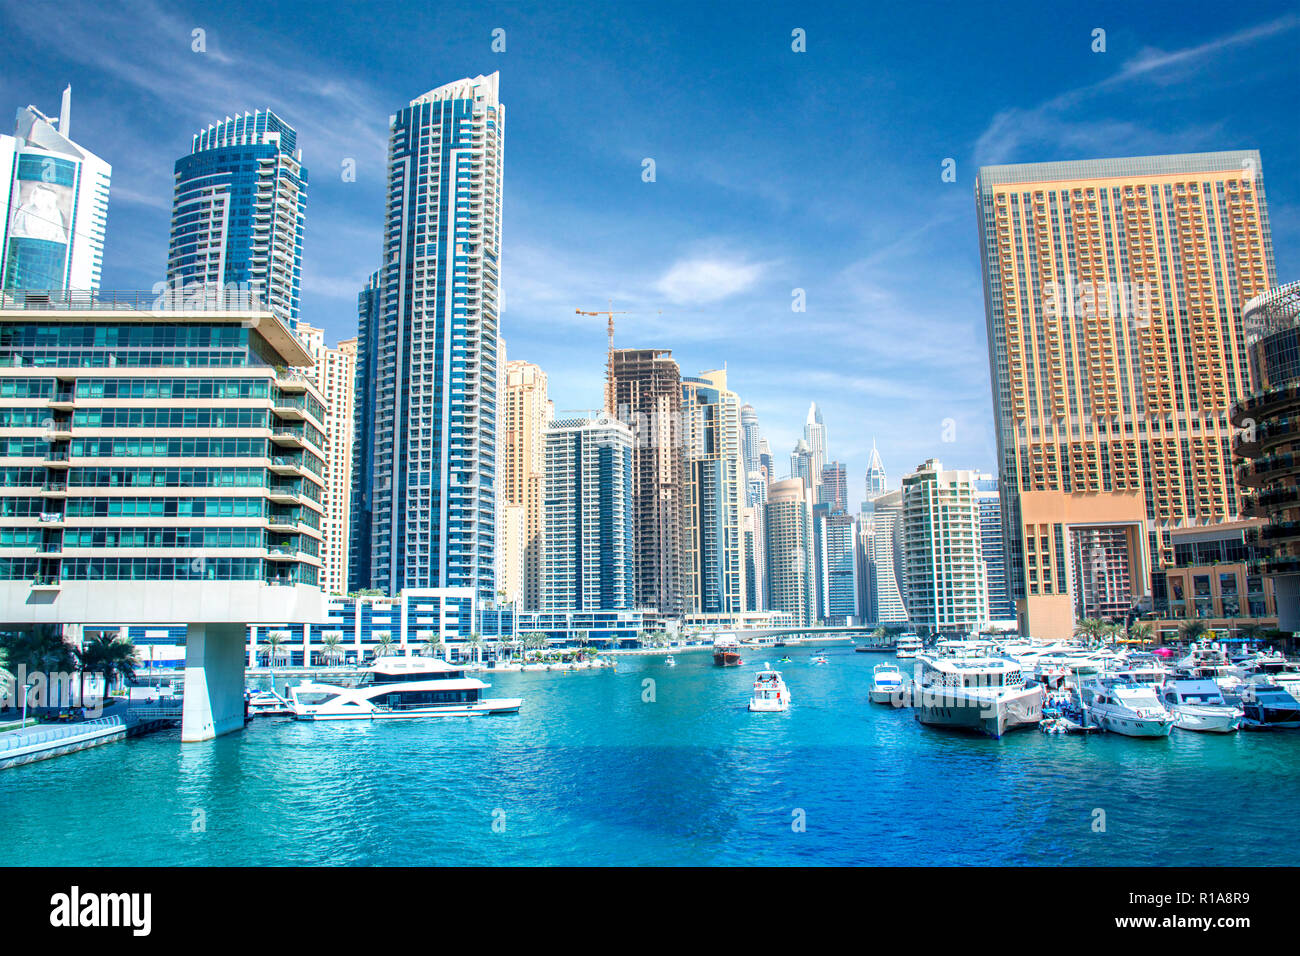 Beautiful View of Dubai Marina lake with luxury superyacht and colorful buildings Stock Photo